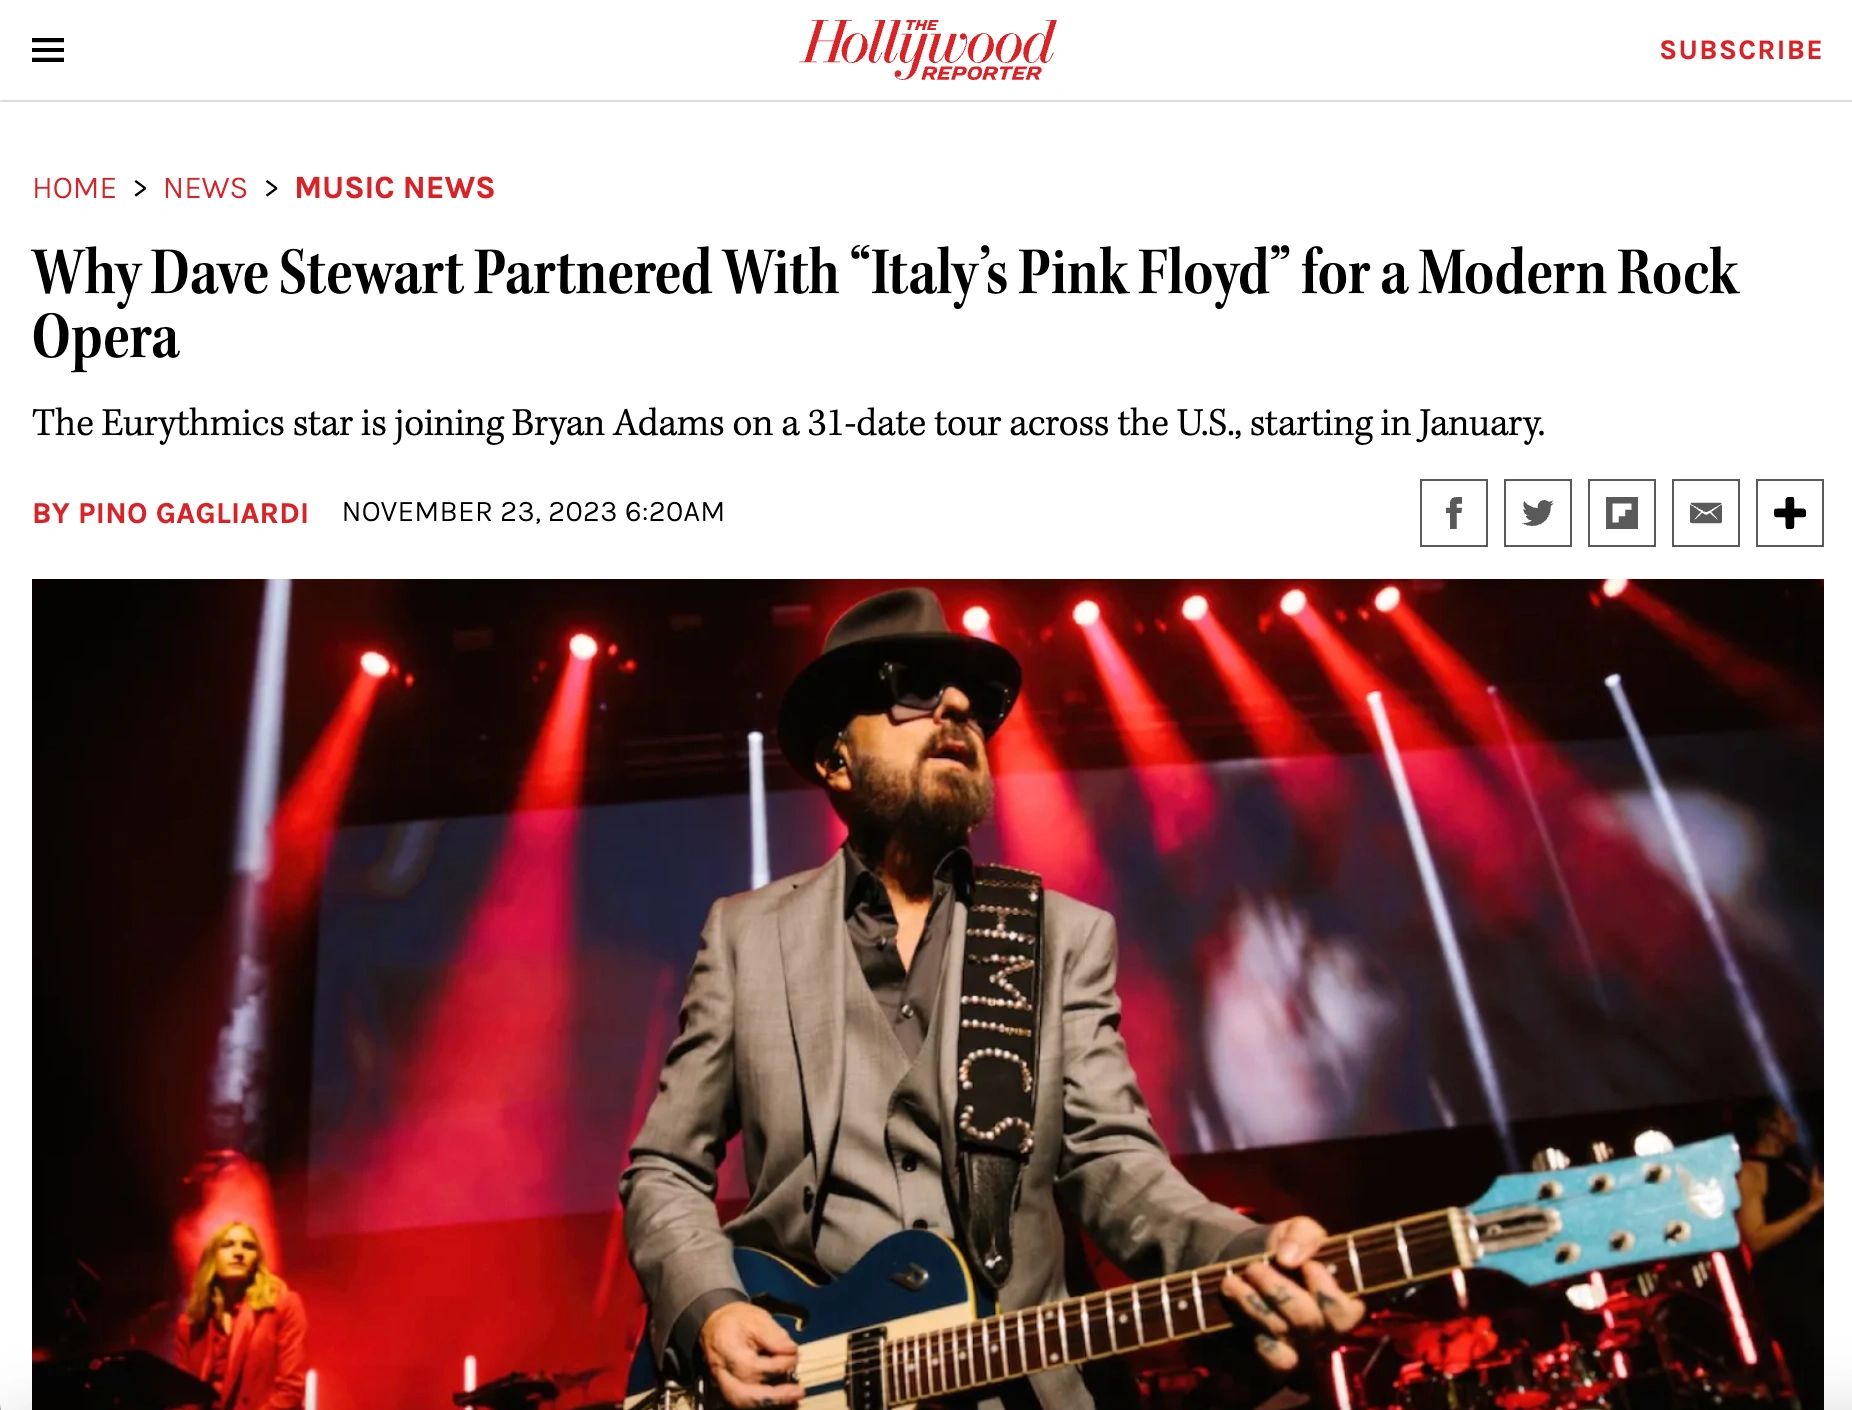 Hollywood Reporter

Why Dave Stewart Partnered With “Italy’s Pink Floyd” for a Modern Rock Opera
